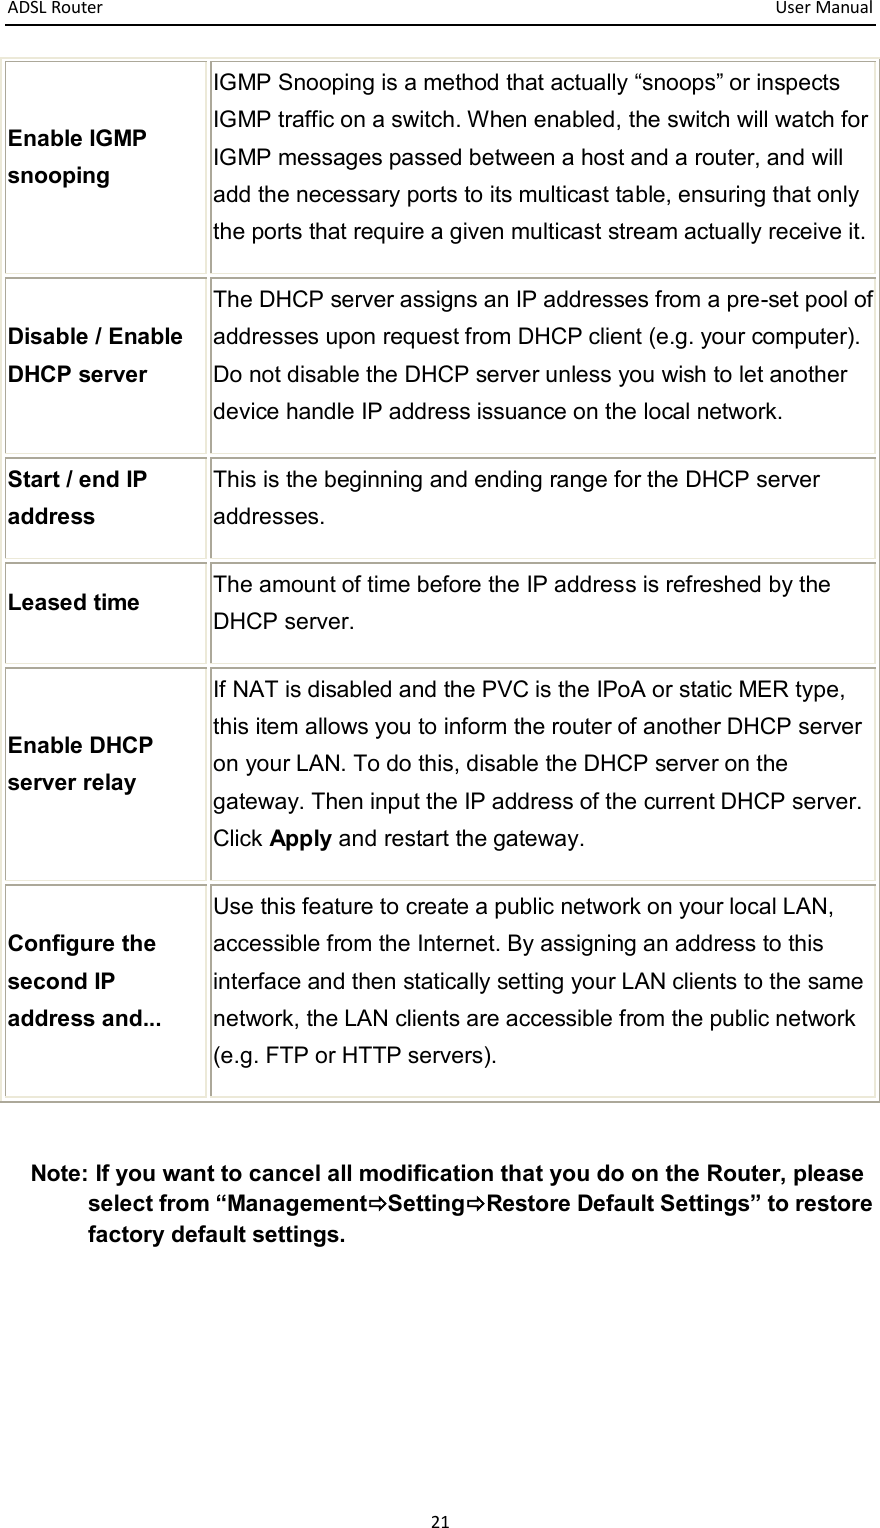 ADSL Router       User Manual 21 Enable IGMP snooping IGMP Snooping is a method that actually “snoops” or inspects IGMP traffic on a switch. When enabled, the switch will watch for IGMP messages passed between a host and a router, and will add the necessary ports to its multicast table, ensuring that only the ports that require a given multicast stream actually receive it. Disable / Enable DHCP server The DHCP server assigns an IP addresses from a pre-set pool of addresses upon request from DHCP client (e.g. your computer). Do not disable the DHCP server unless you wish to let another device handle IP address issuance on the local network. Start / end IP address This is the beginning and ending range for the DHCP server addresses. Leased time The amount of time before the IP address is refreshed by the DHCP server. Enable DHCP server relay   If NAT is disabled and the PVC is the IPoA or static MER type, this item allows you to inform the router of another DHCP server on your LAN. To do this, disable the DHCP server on the gateway. Then input the IP address of the current DHCP server. Click Apply and restart the gateway. Configure the second IP address and... Use this feature to create a public network on your local LAN, accessible from the Internet. By assigning an address to this interface and then statically setting your LAN clients to the same network, the LAN clients are accessible from the public network (e.g. FTP or HTTP servers).  Note: If you want to cancel all modification that you do on the Router, please select from “ManagementSettingRestore Default Settings” to restore factory default settings. 